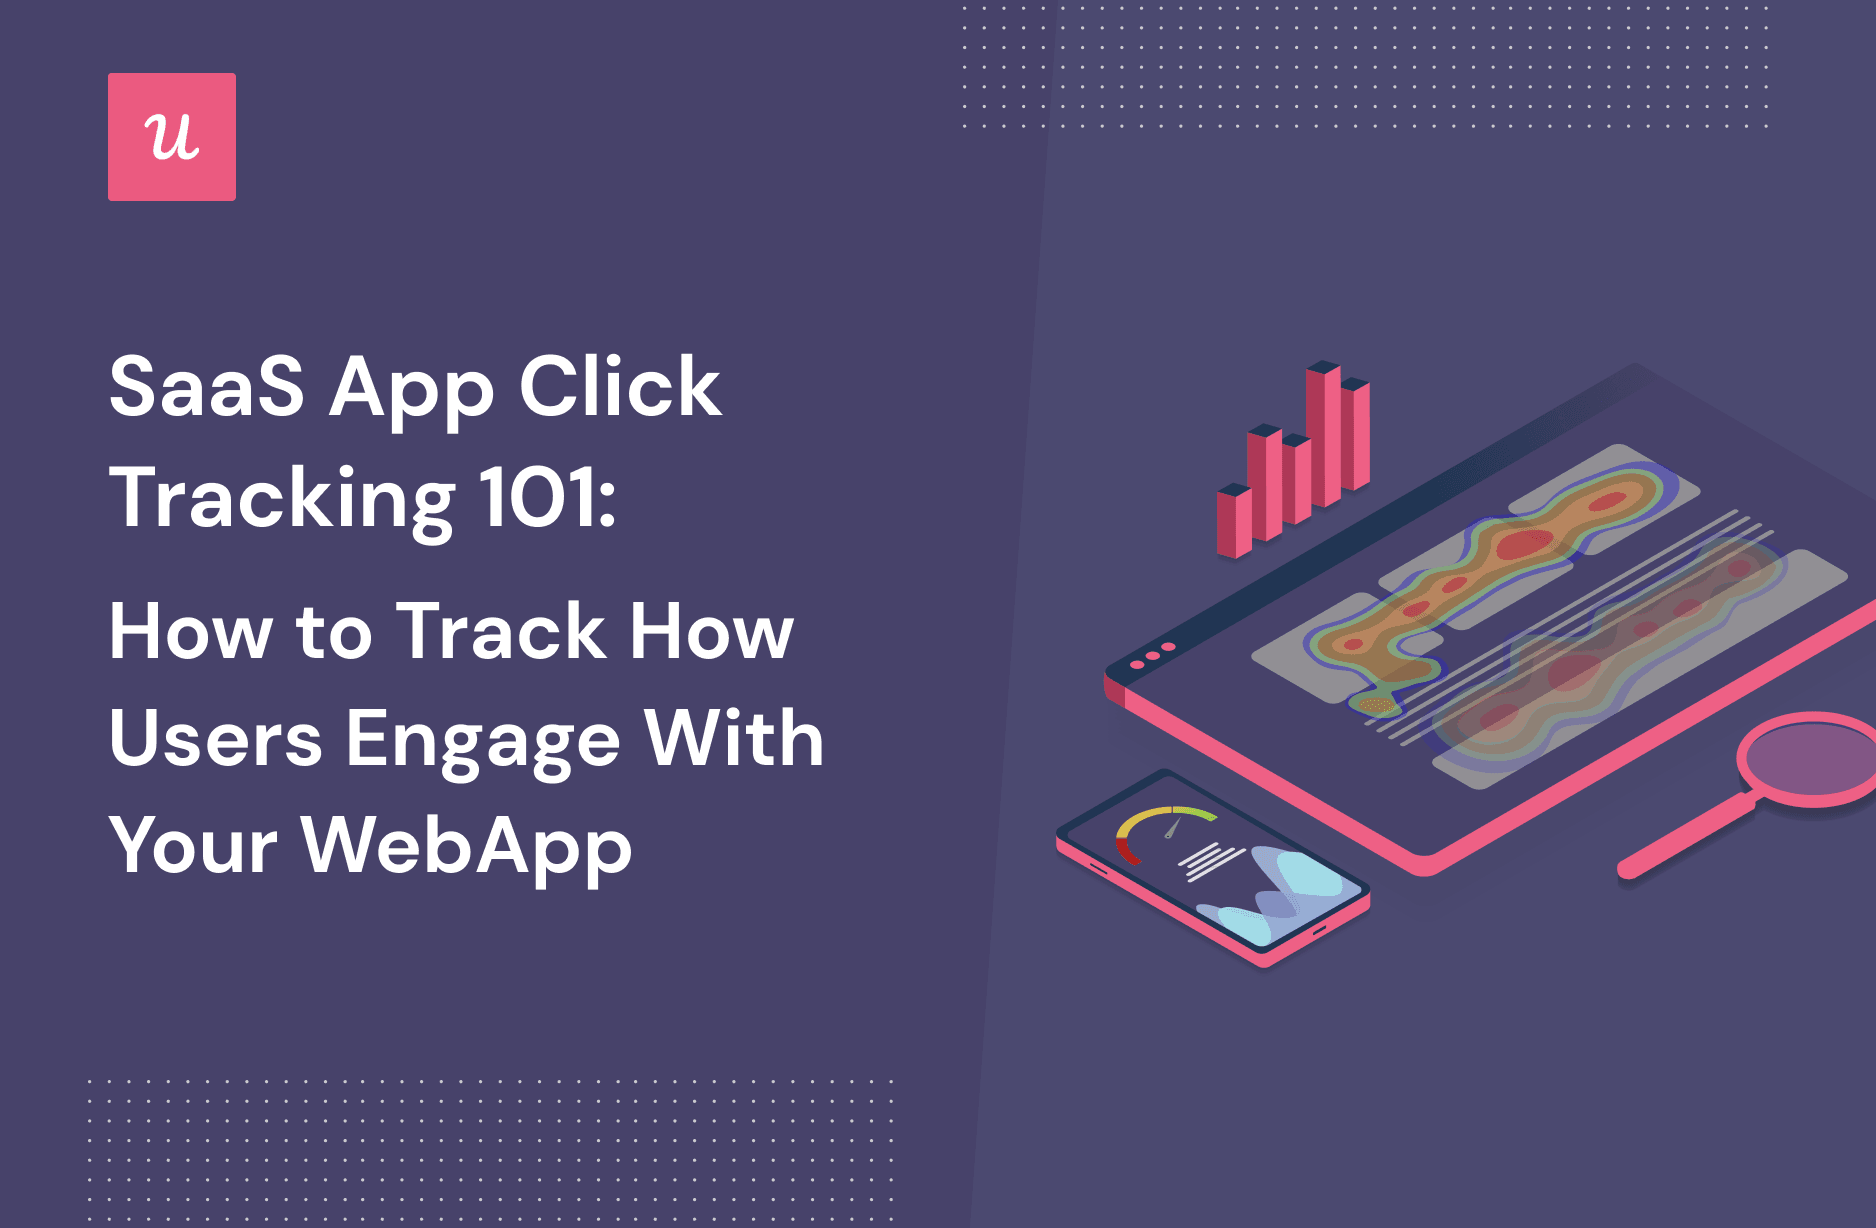 SaaS-App-Click-Tracking-101-How-to-Track-How-Users-Engage-With-Your-WebApp